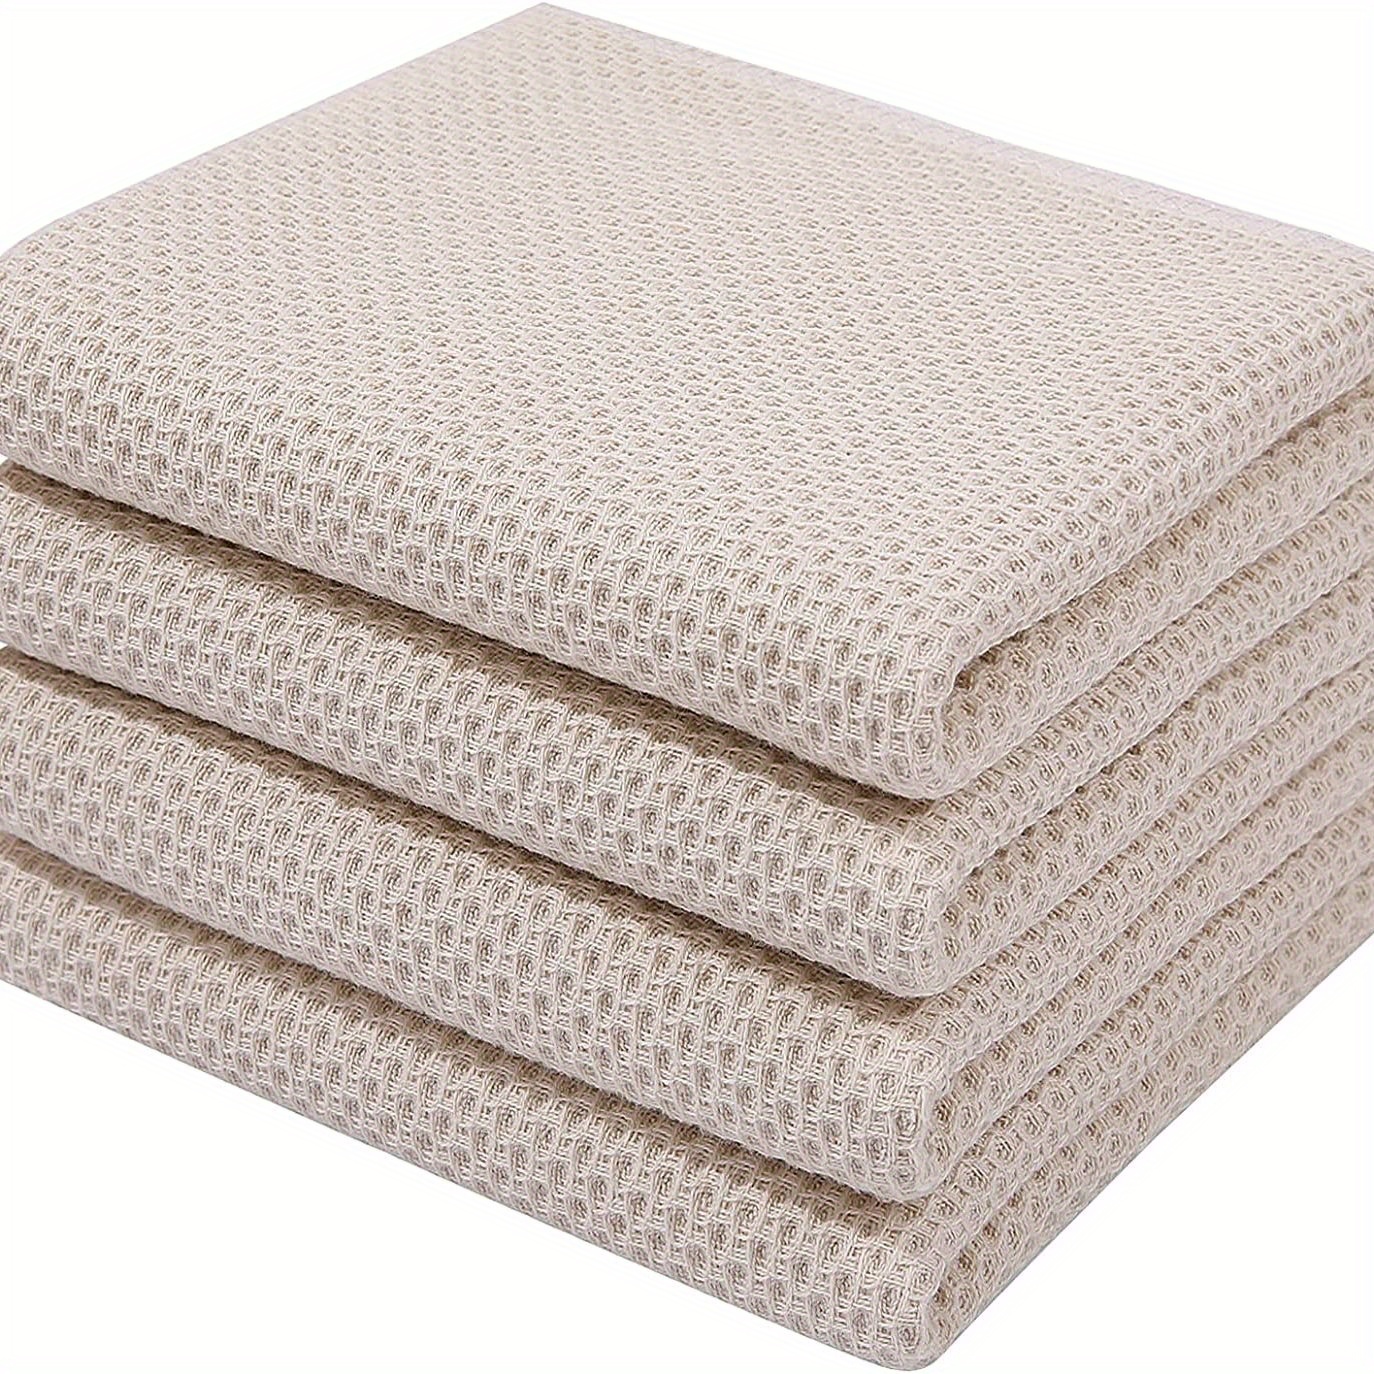 100% Cotton Waffle Weave Kitchen Dish Cloths, Ultra Soft Absorbent